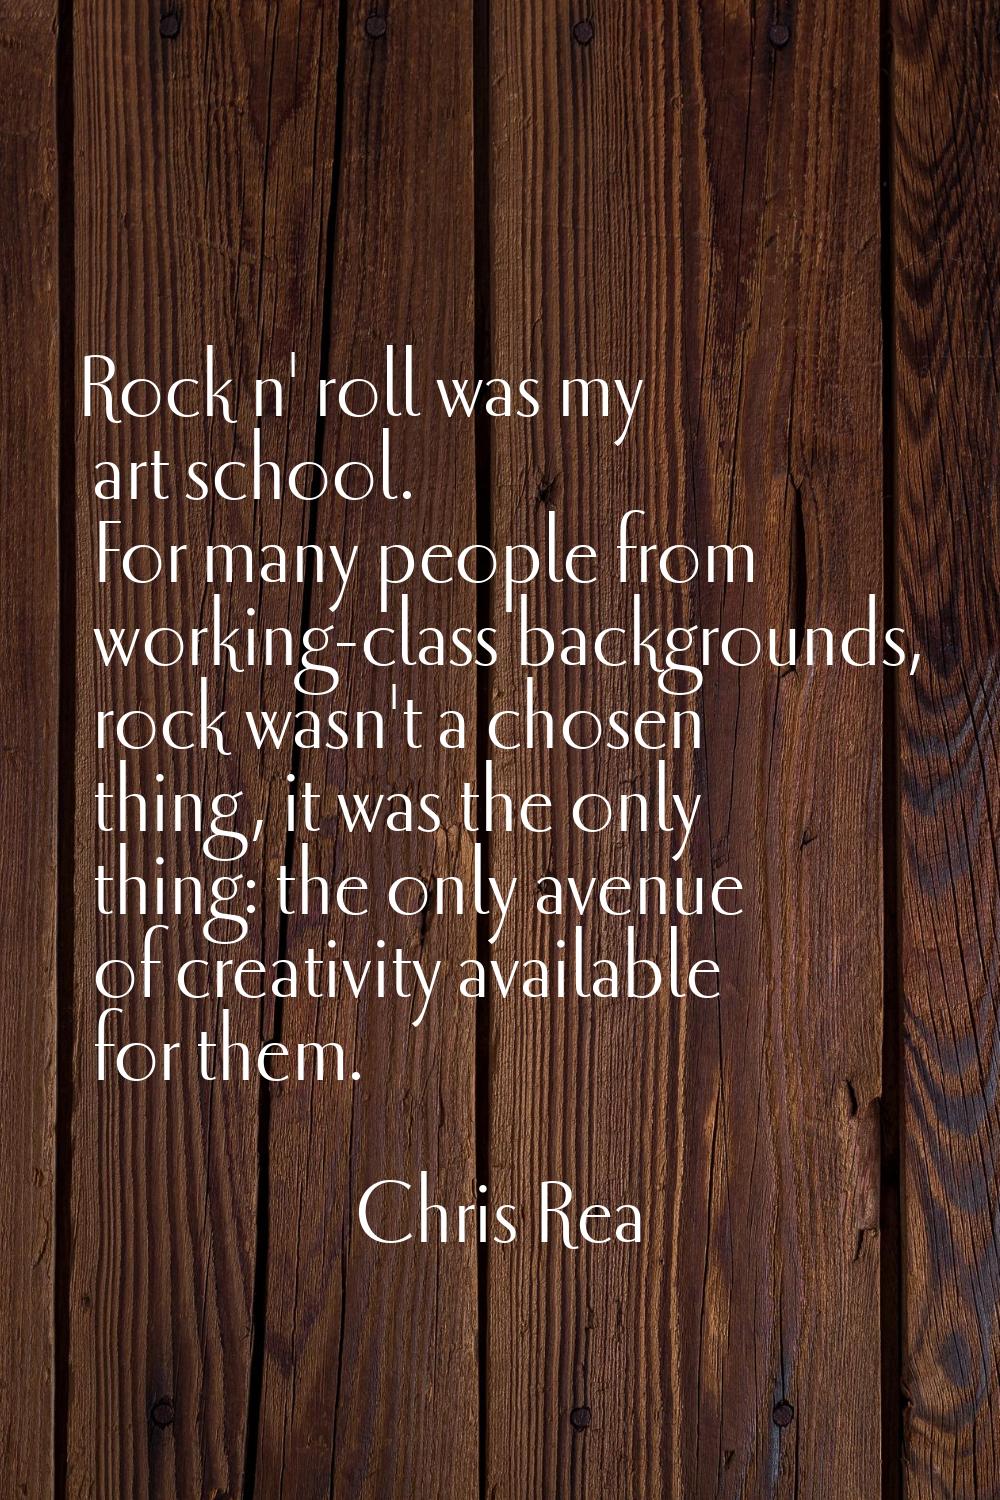 Rock n' roll was my art school. For many people from working-class backgrounds, rock wasn't a chose